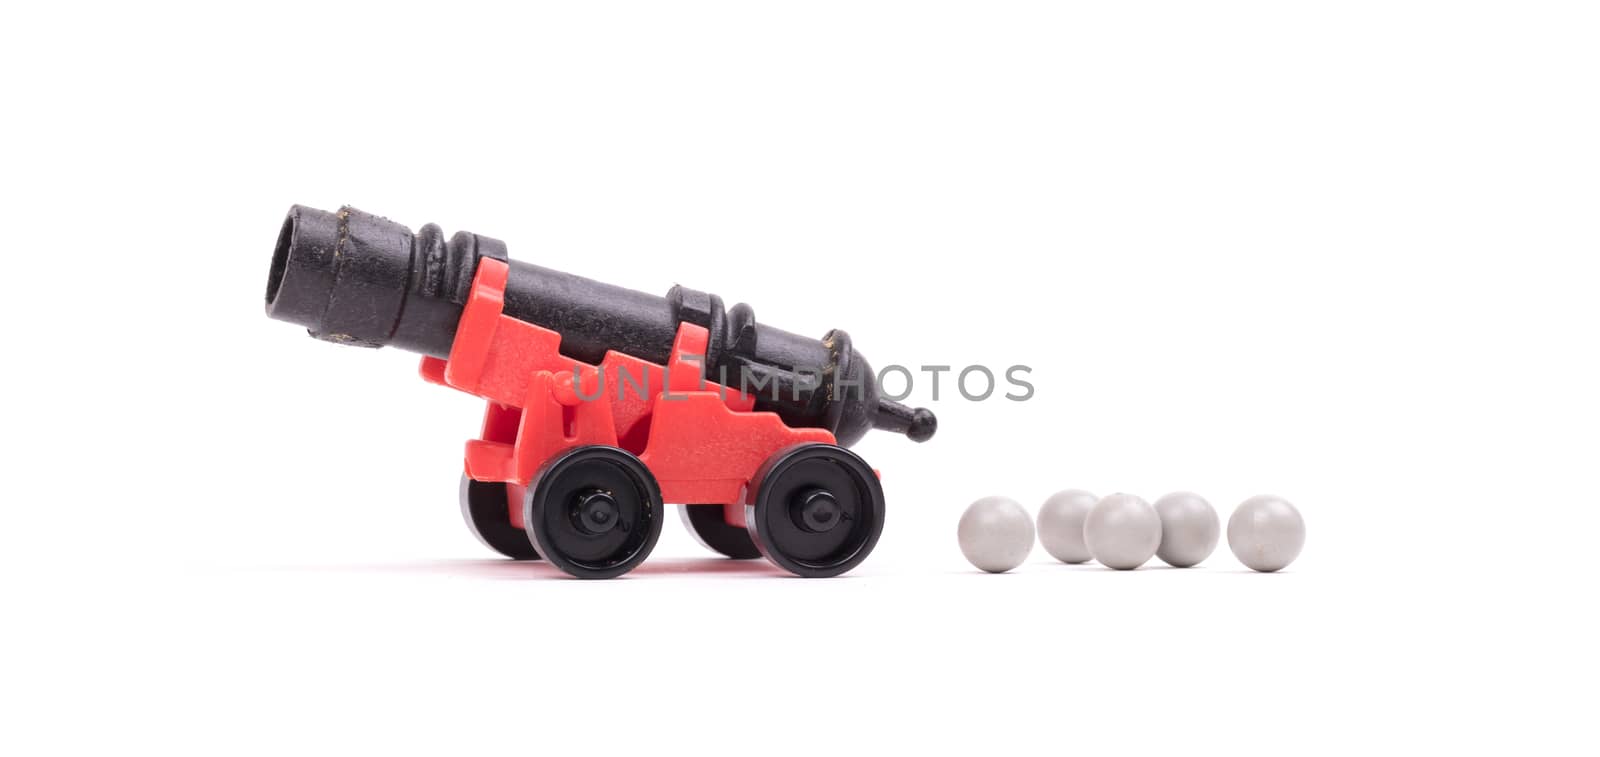 Old plastic toy, canon, isolated on white